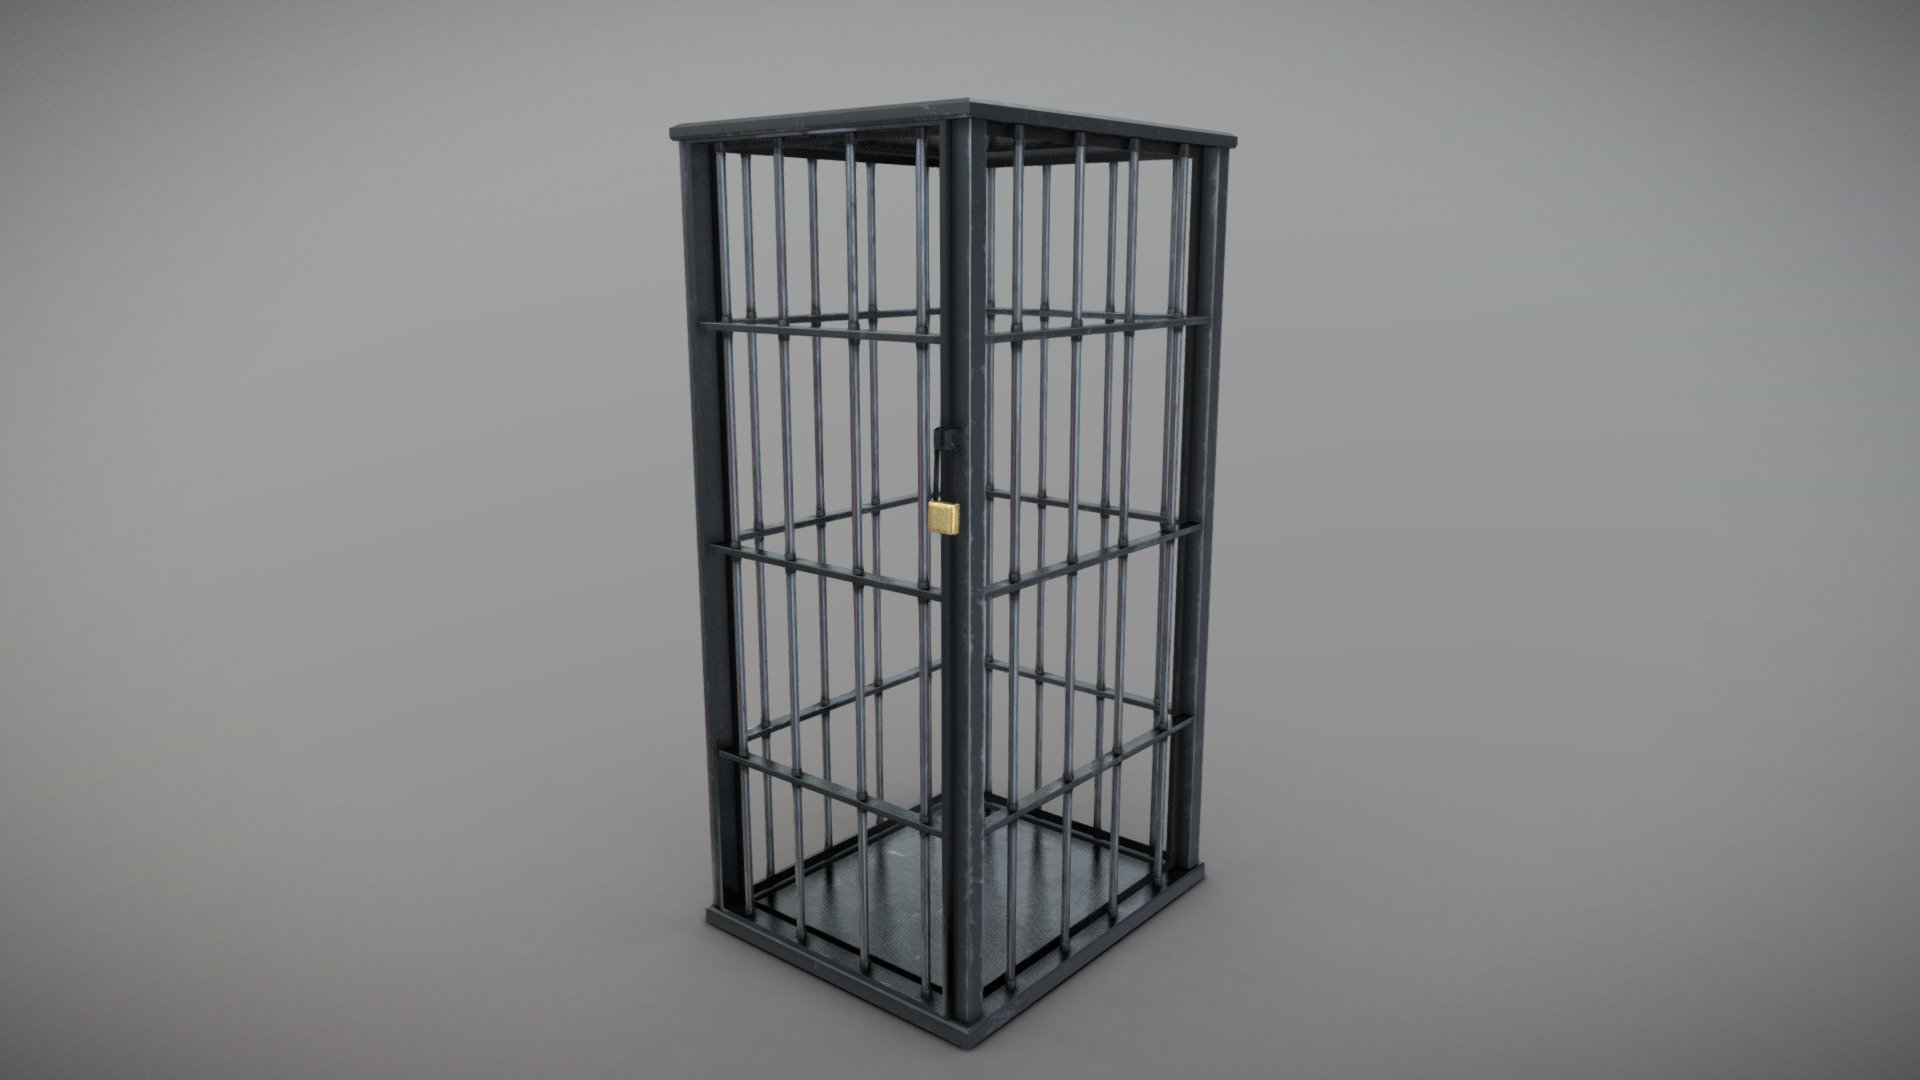 Tall Cage

Made in Blender and textured in Substance Painter. 

It was made a while ago, bit older model but wanted upload it here at Sketchfab 3d model